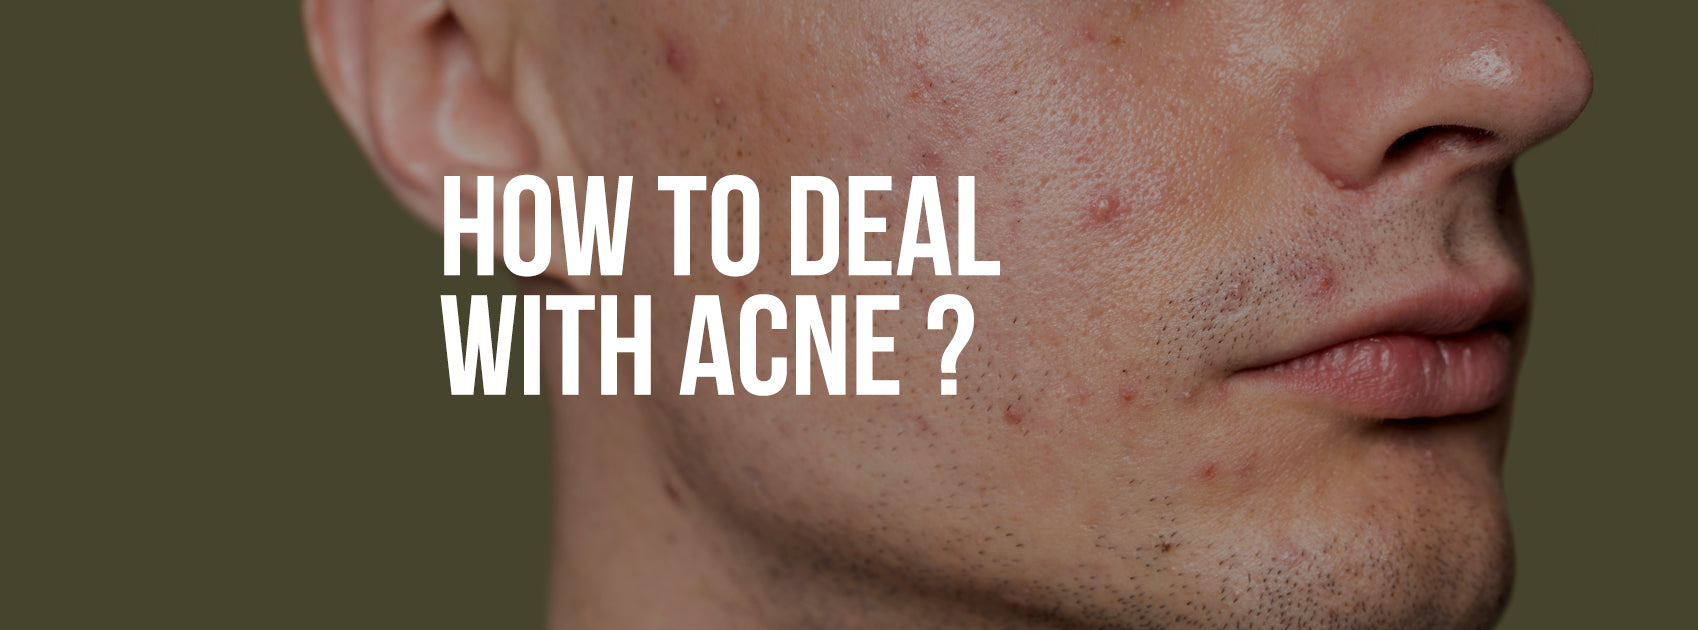 HOW TO DEAL WITH ACNE? SYMPTOMS, TRIGGERS & REMEDY